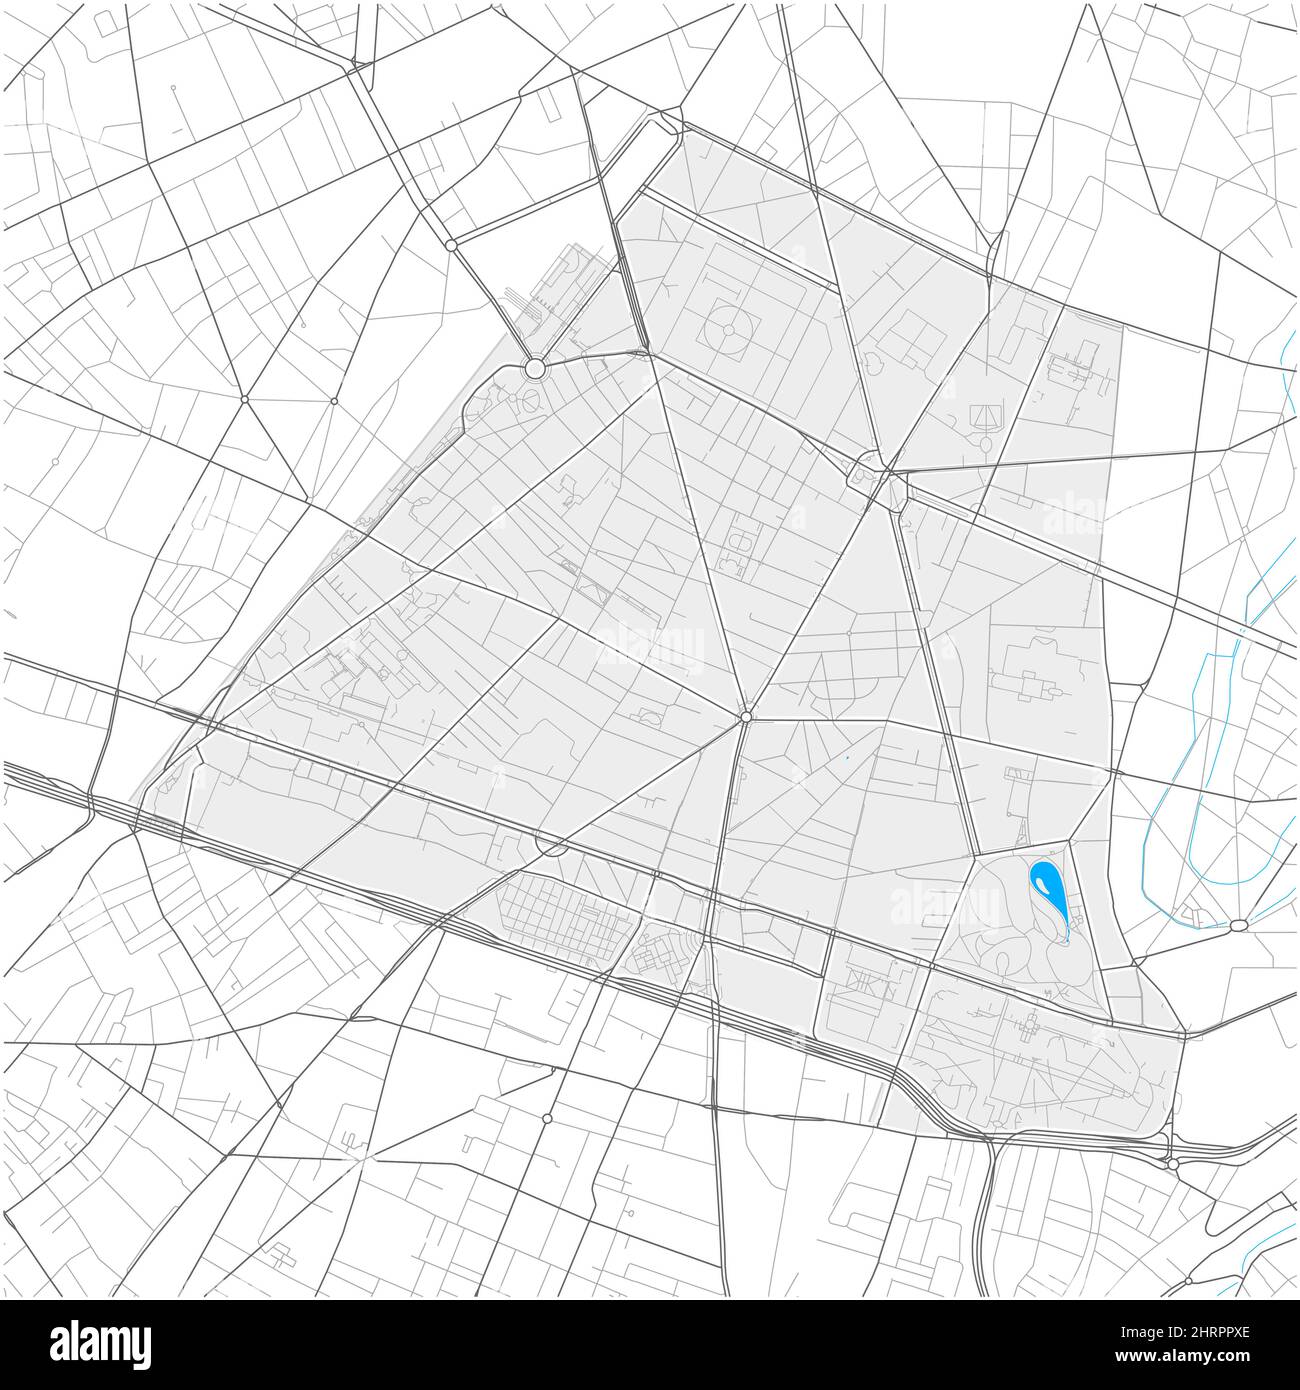 14th Arrondissement, Paris, FRANCE, high detail vector map with city boundaries and editable paths. White outlines for main roads. Many smaller paths. Stock Vector